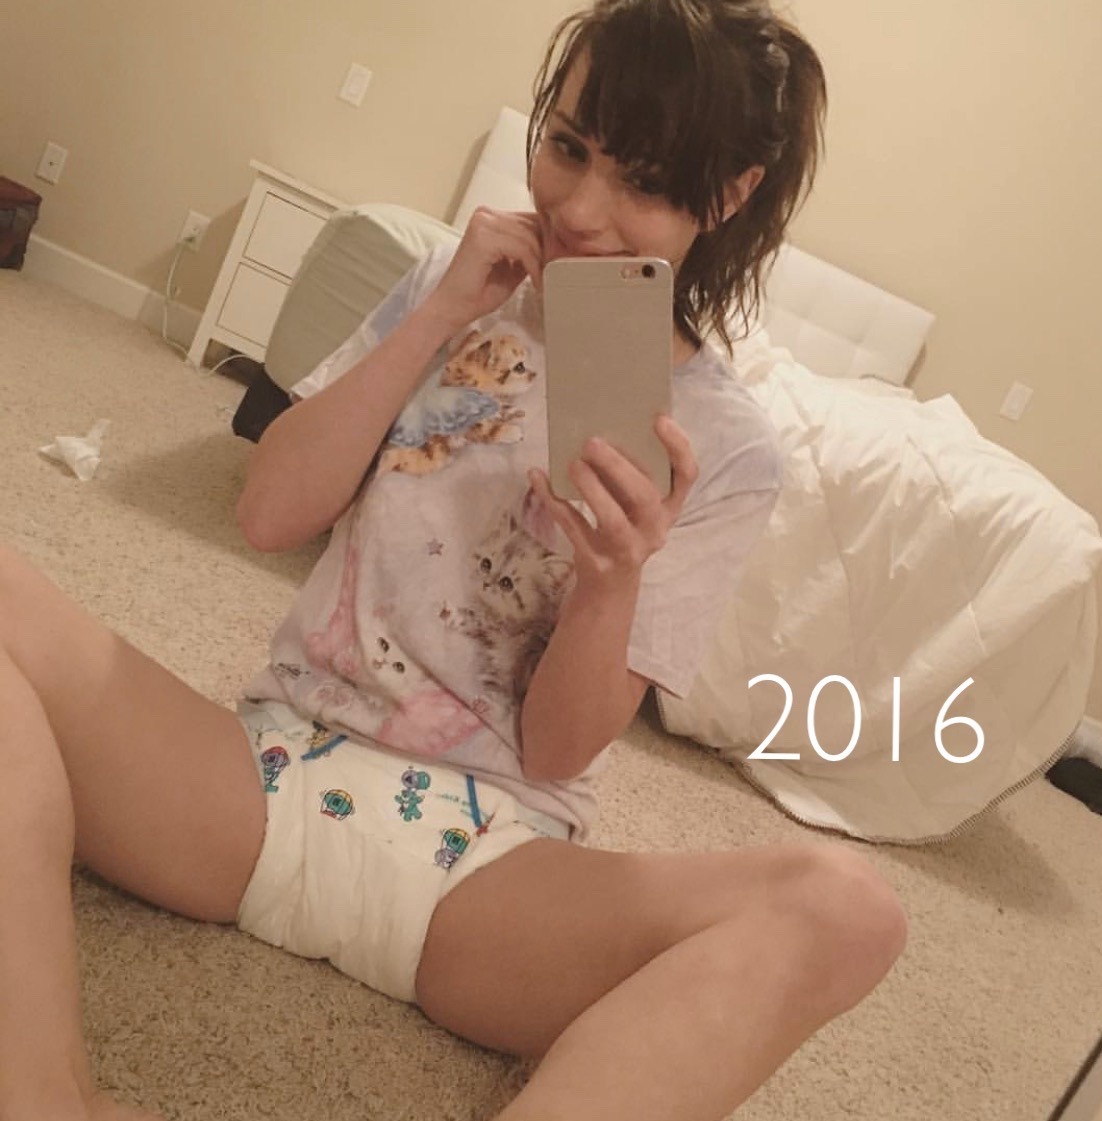 Split /. S. recomended ABDL Shemale plays in her squishie's aka diapers.